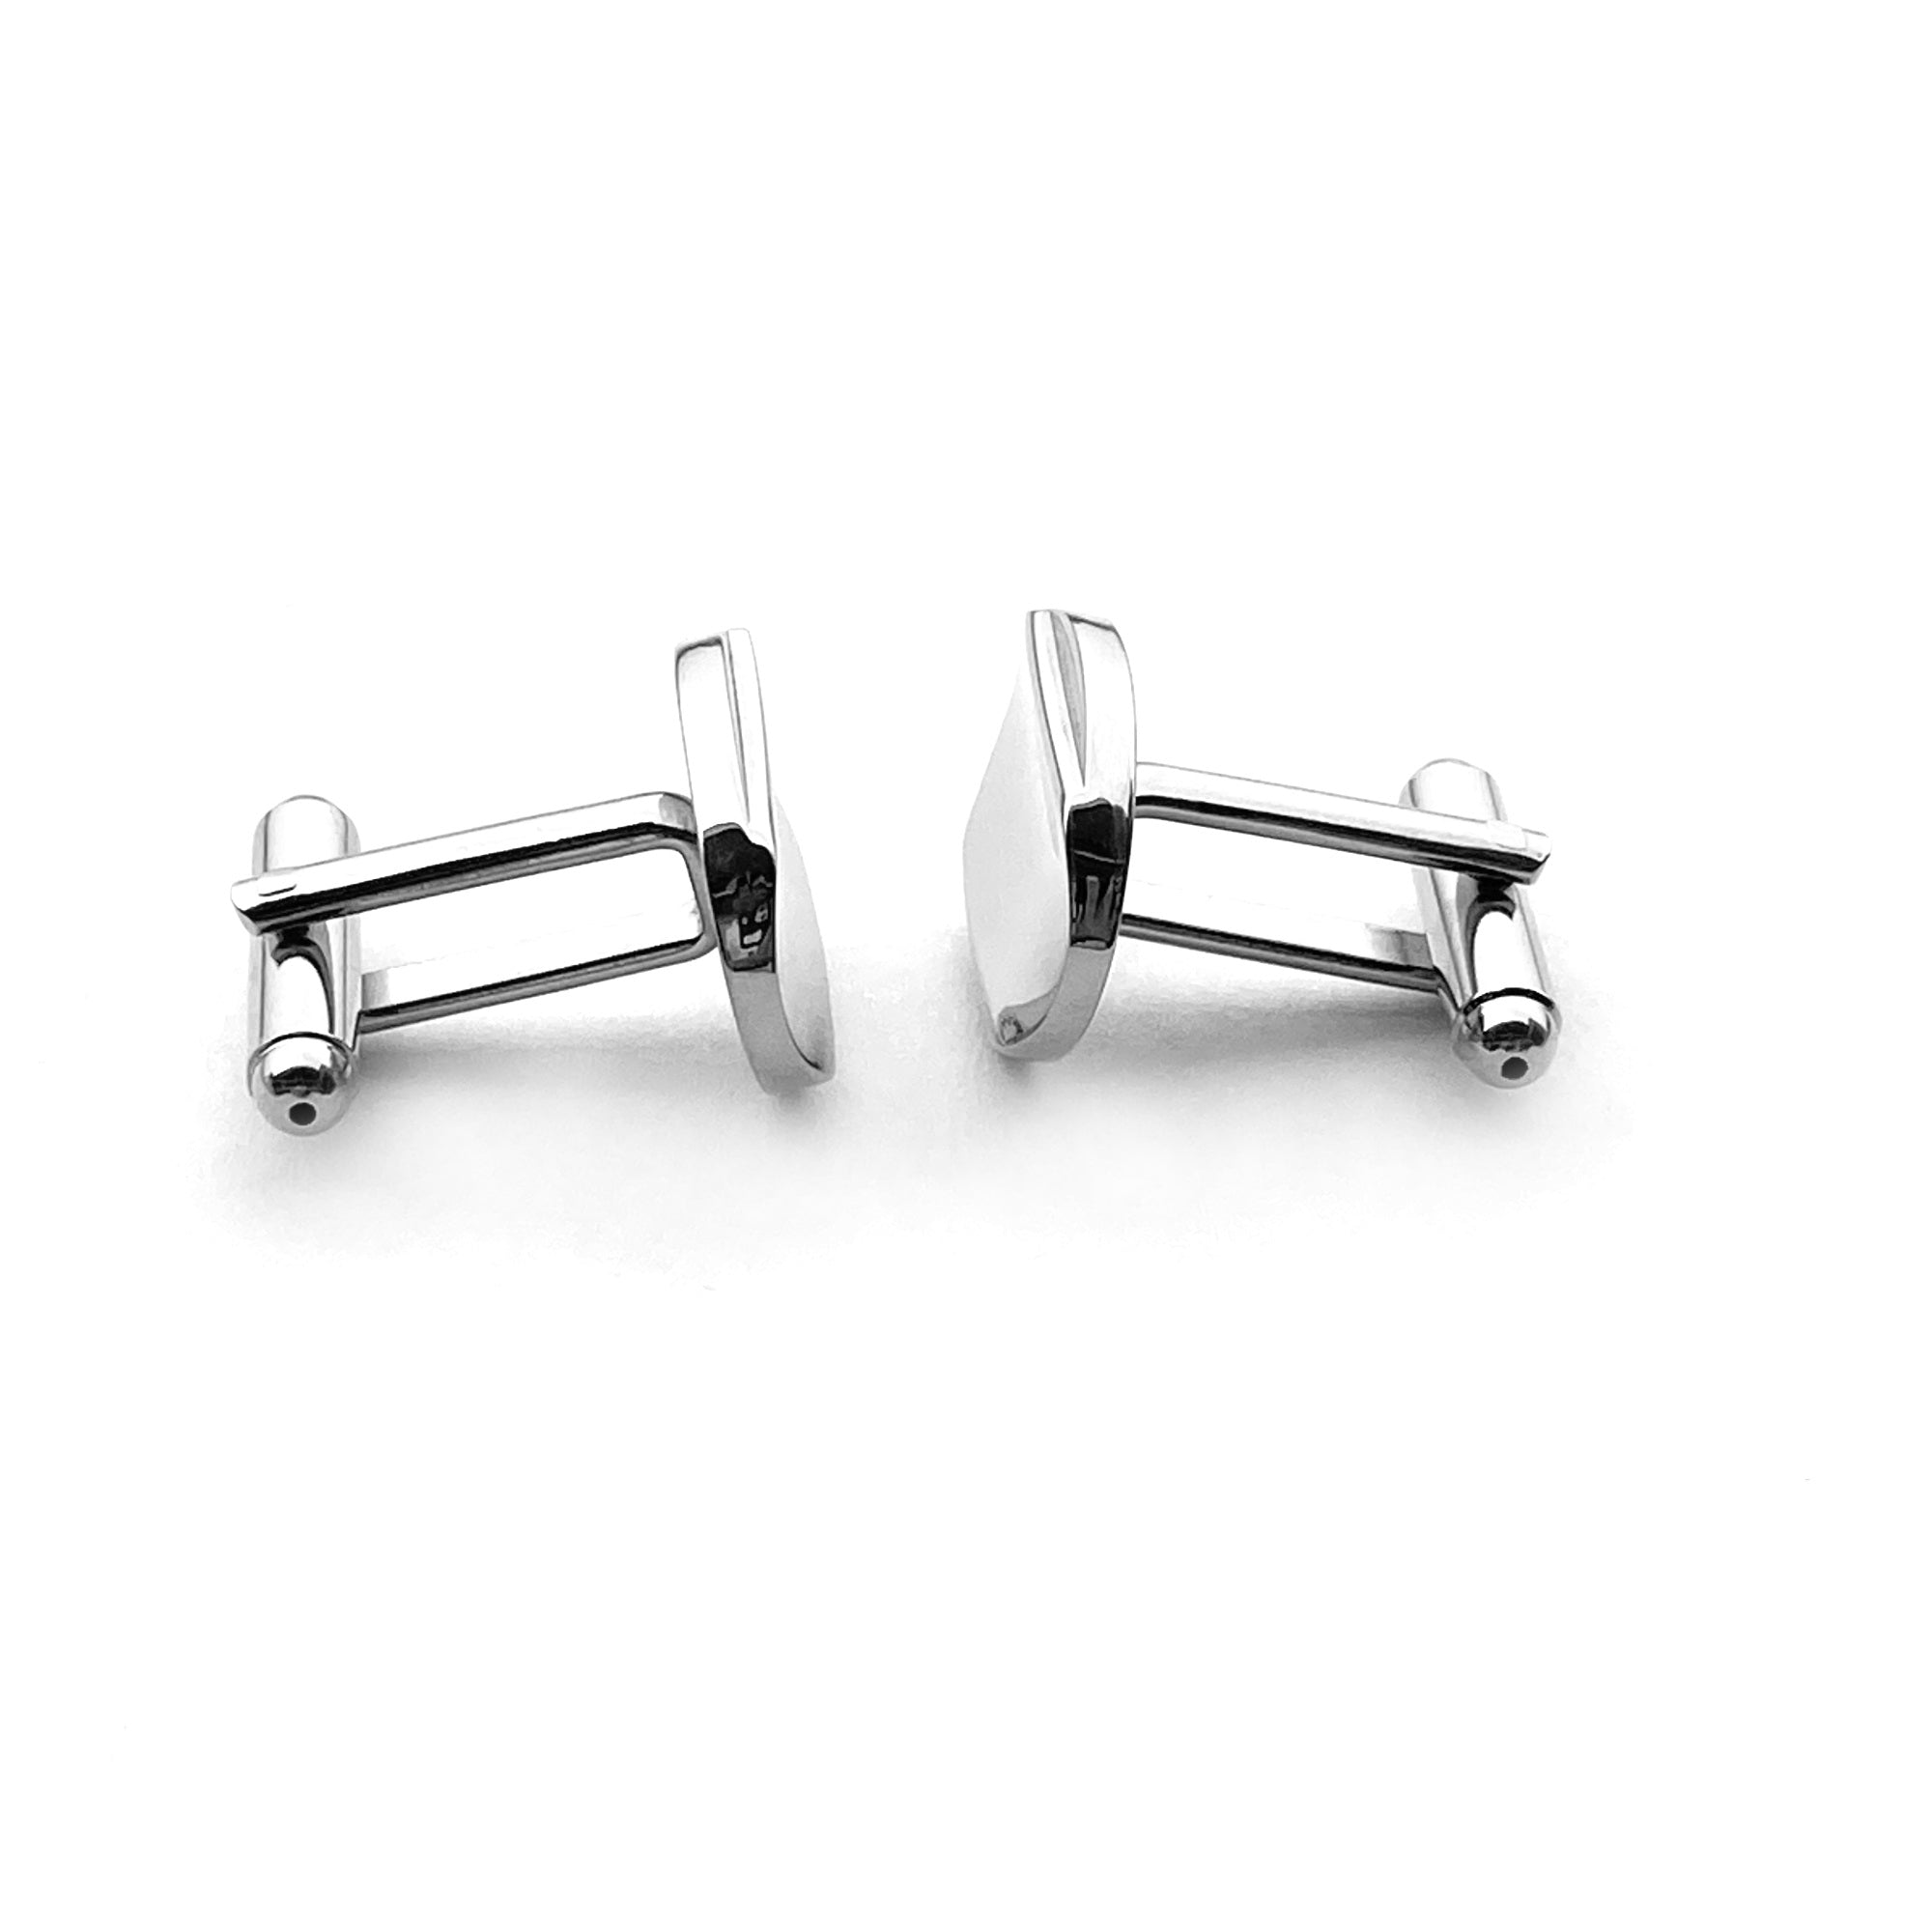 Silver Oval  With Central Curve Cufflinks